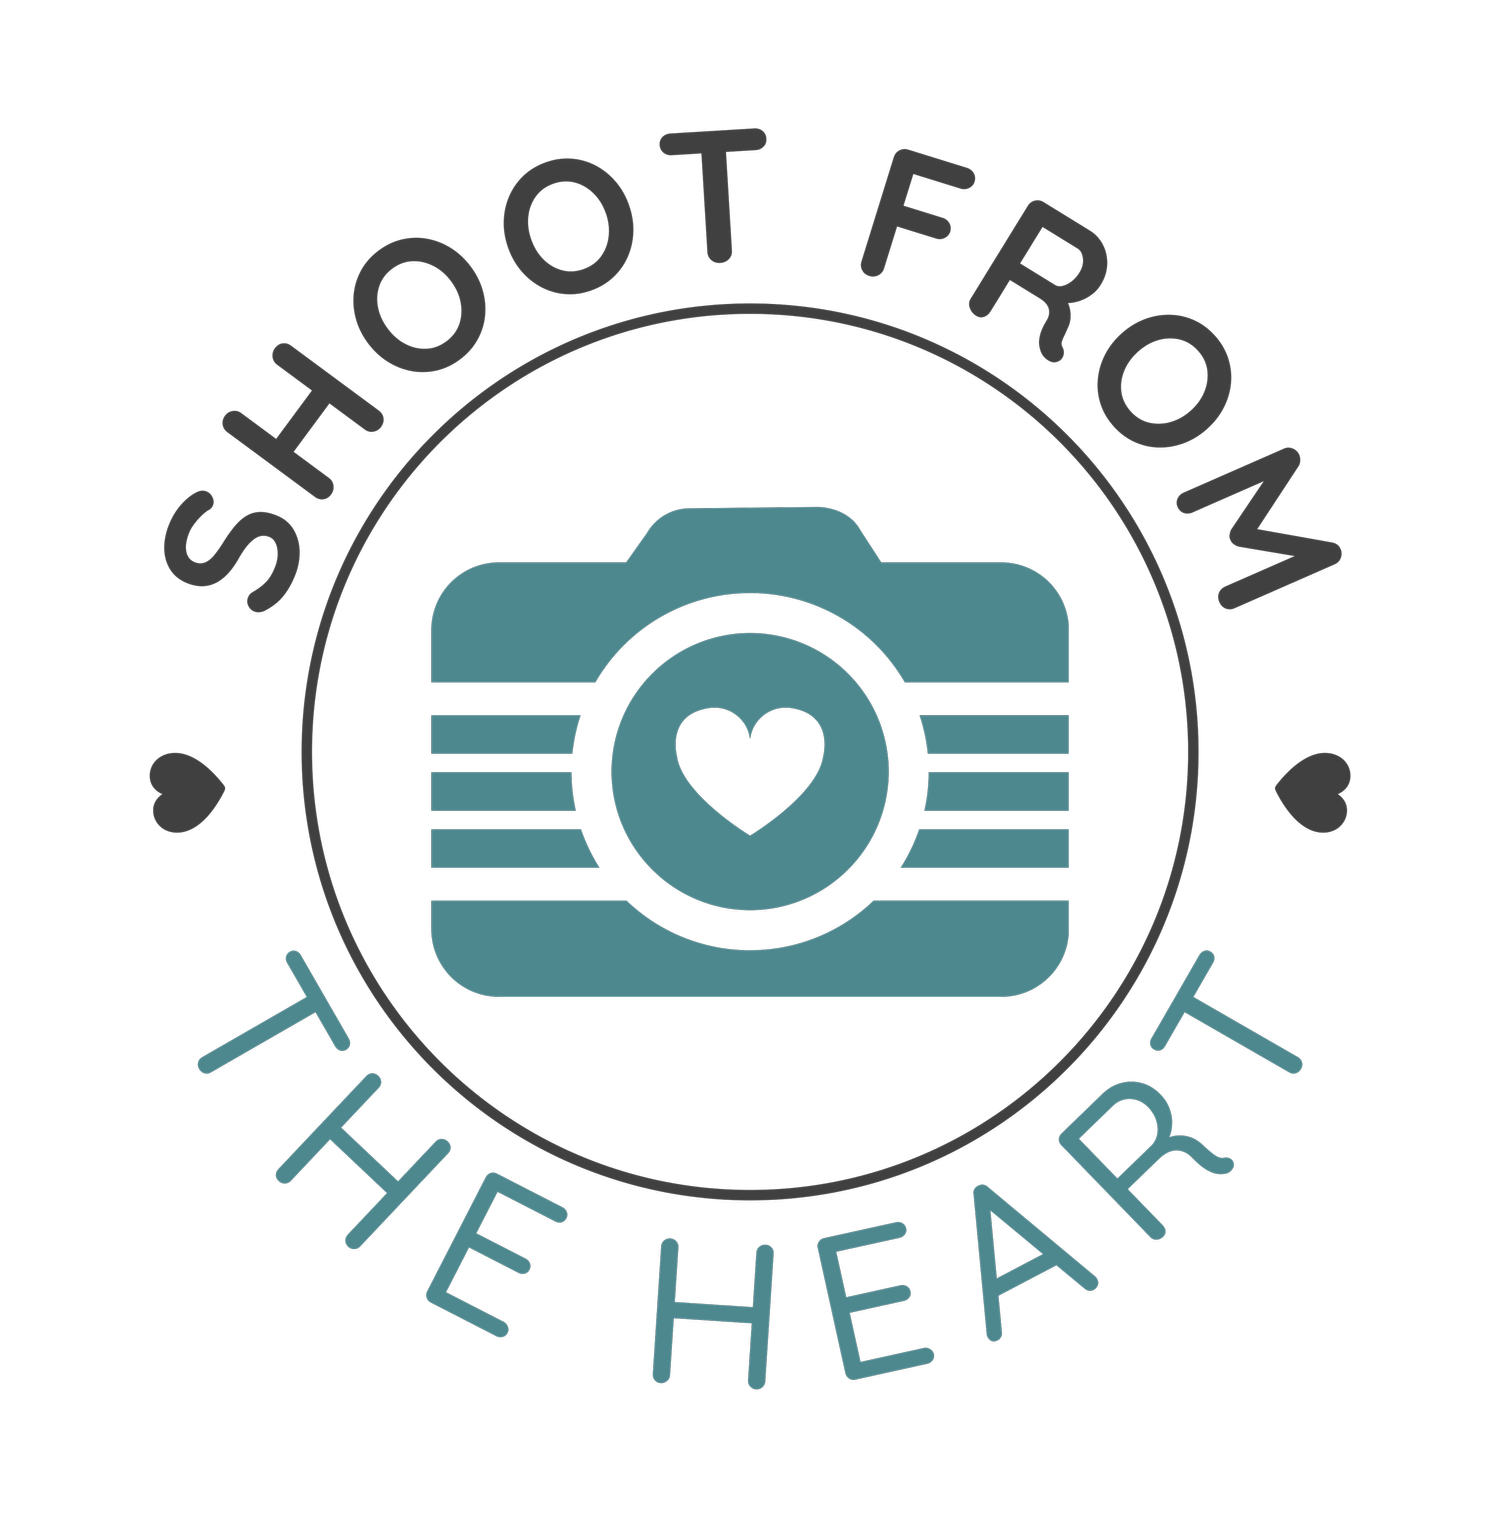 Shoot From The Heart